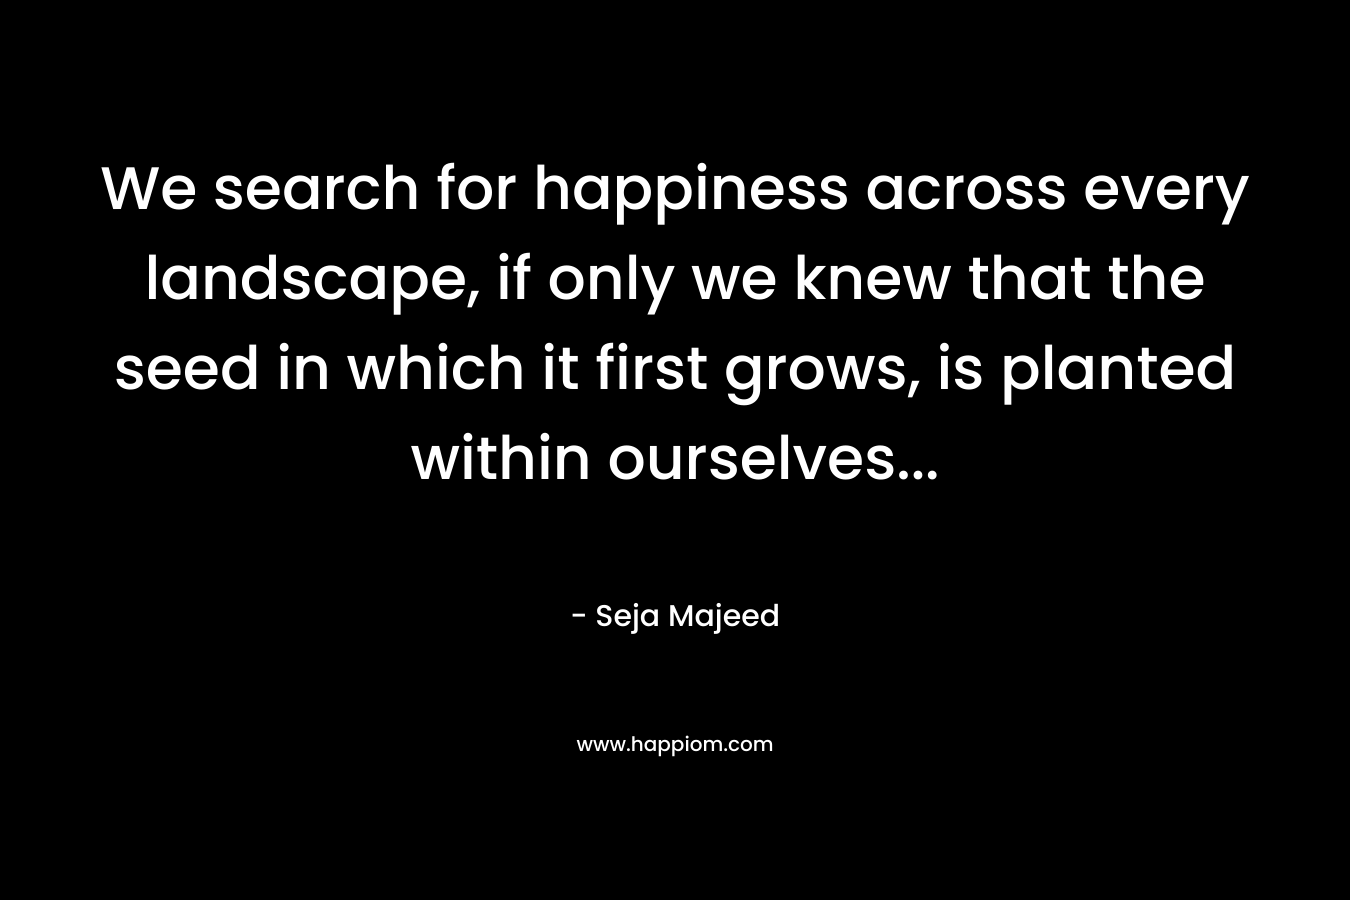 We search for happiness across every landscape, if only we knew that the seed in which it first grows, is planted within ourselves...